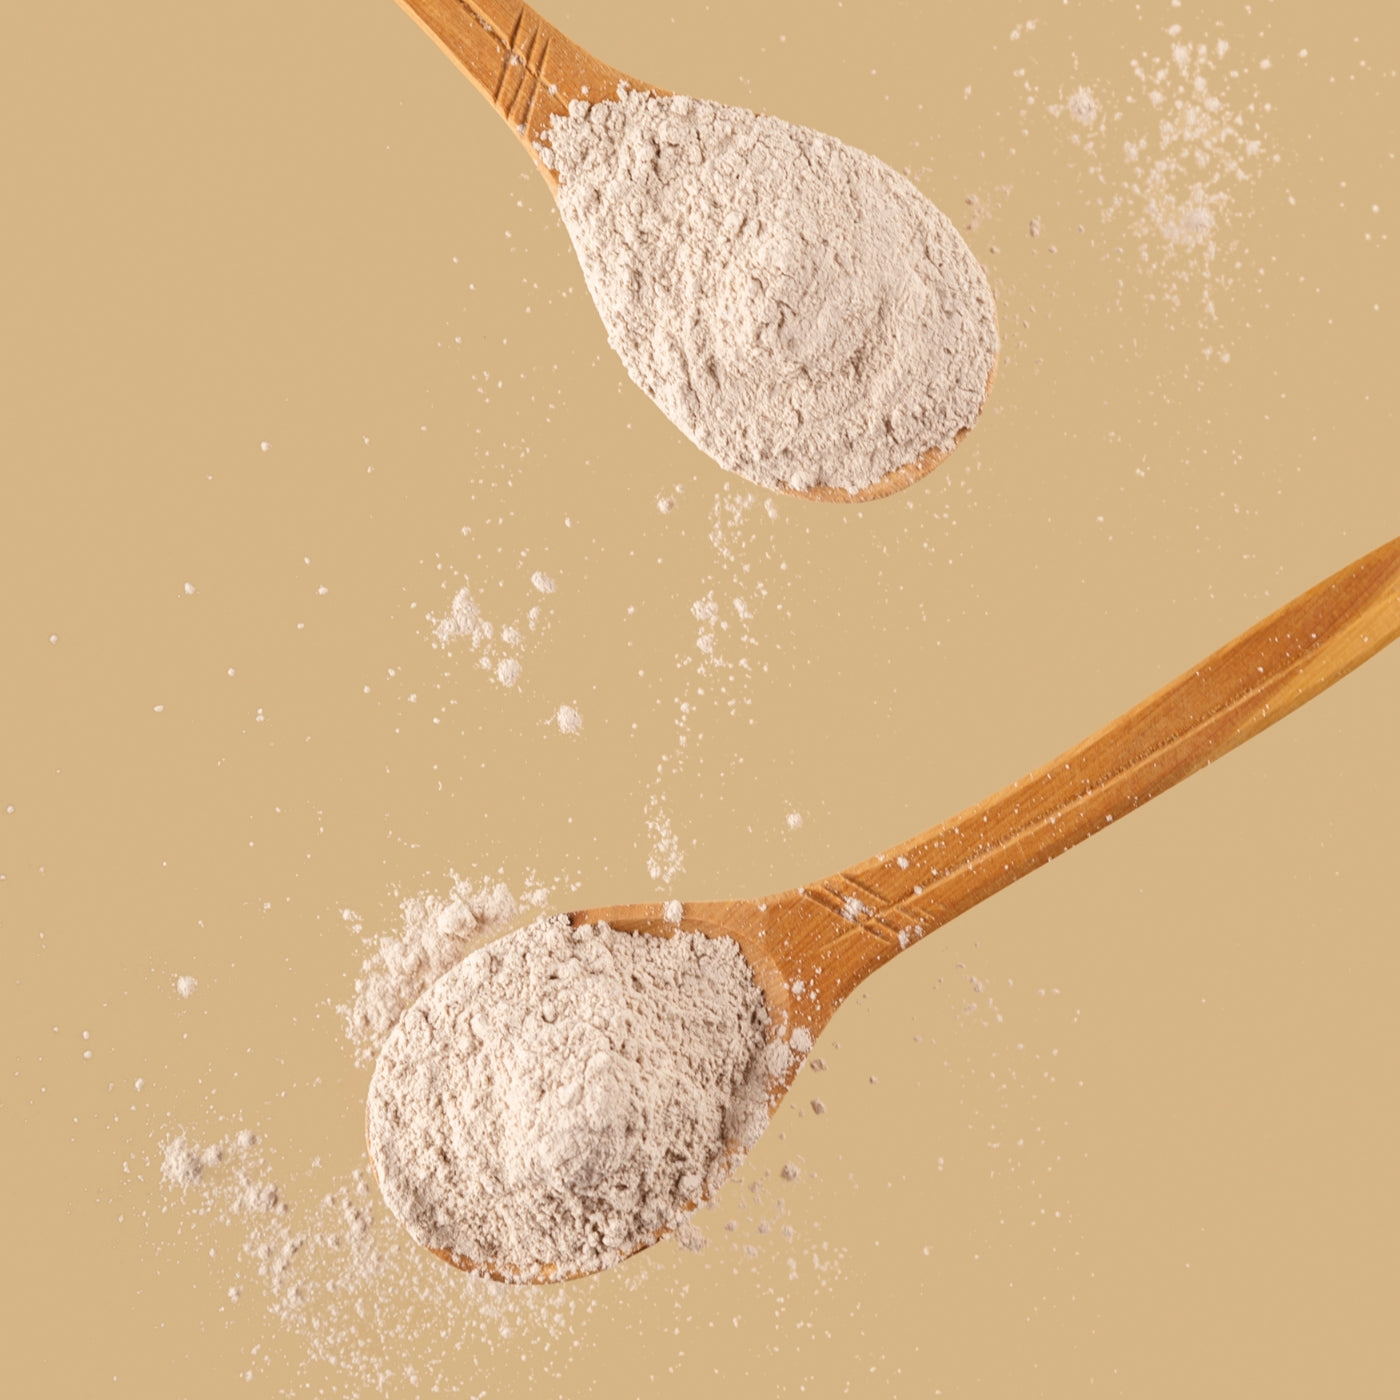 How to choose an exfoliant for your skin type